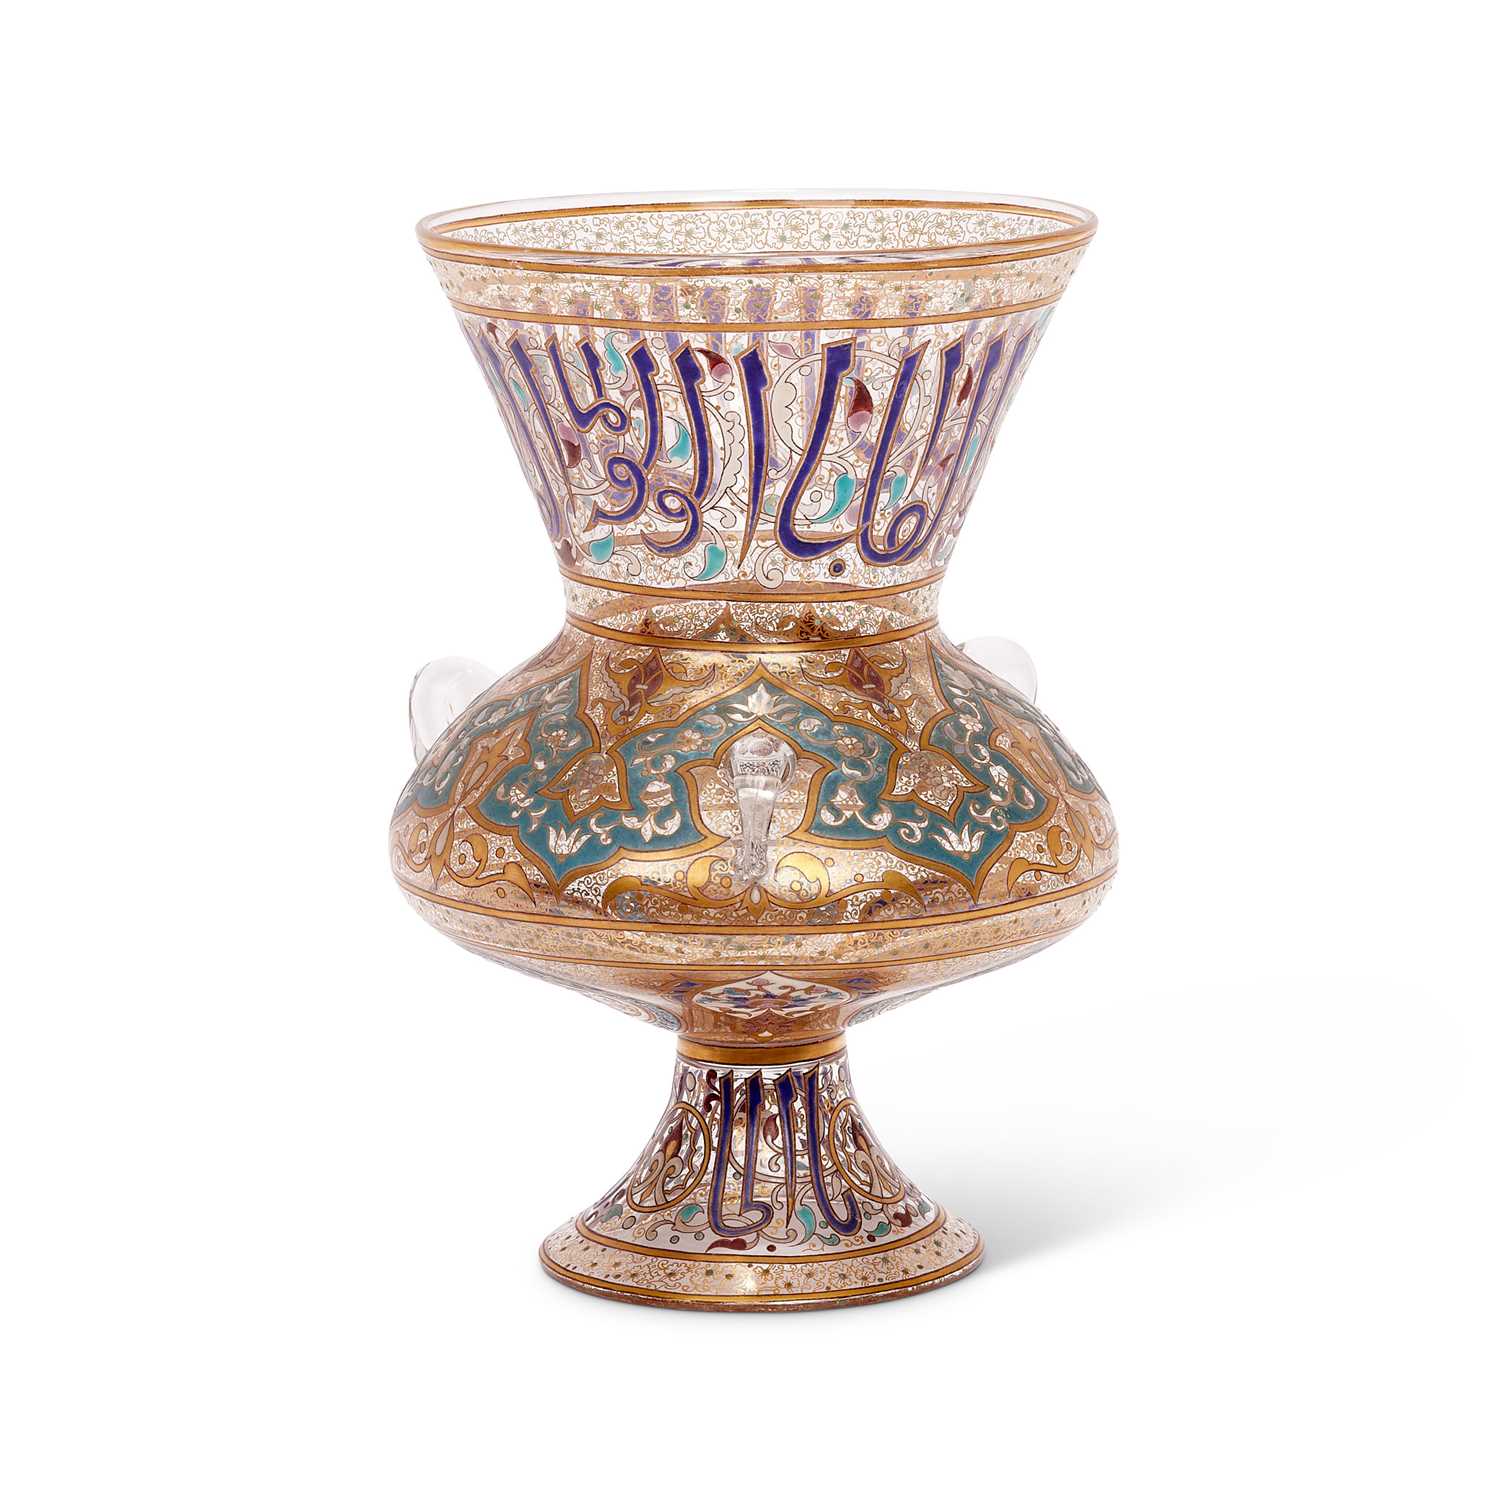 A. BUCAN: A FINE AND RARE 19TH CENTURY FRENCH PERSIAN STYLE ENAMELLED AND GILT GLASS VASE - Image 3 of 7